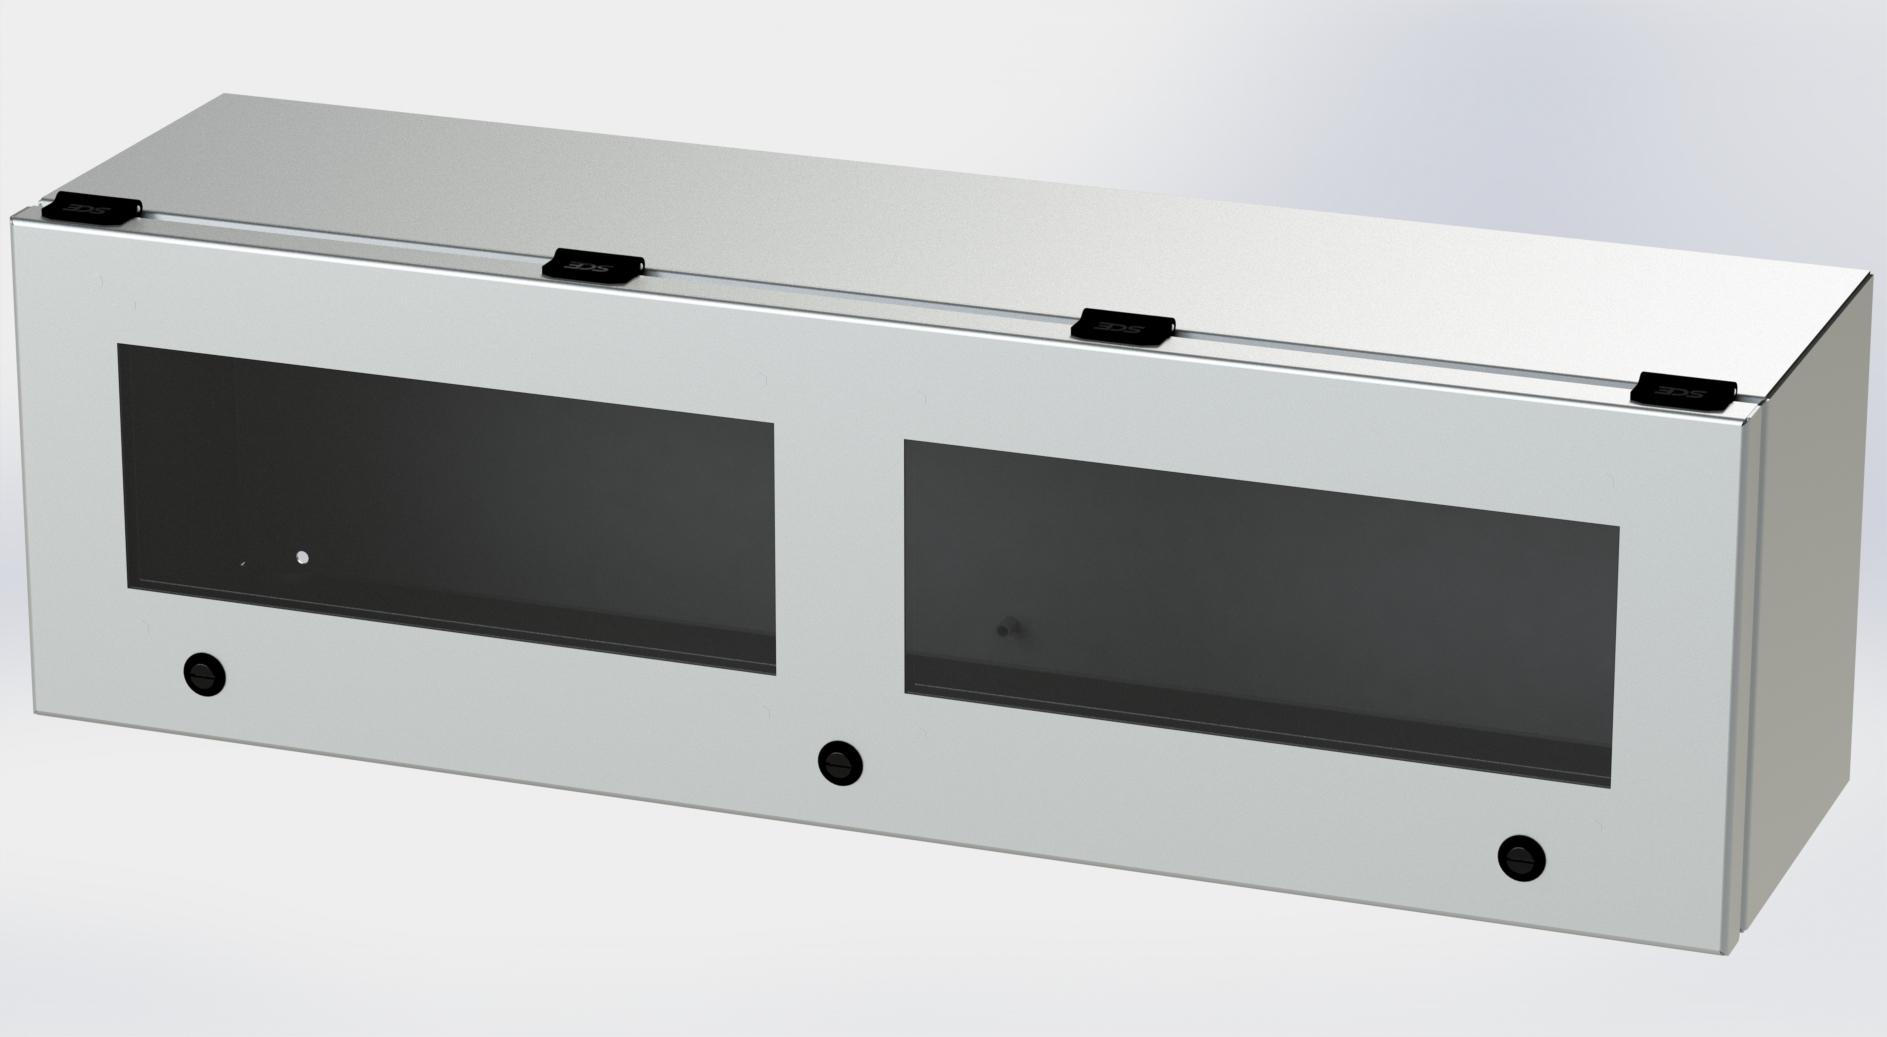 Saginaw Control SCE-L9308ELJWSS S.S. ELJ Trough Window Enclosure, Height:9.00", Width:30.00", Depth:8.00", #4 brushed finish on all exterior surfaces. Optional sub-panels are powder coated white.